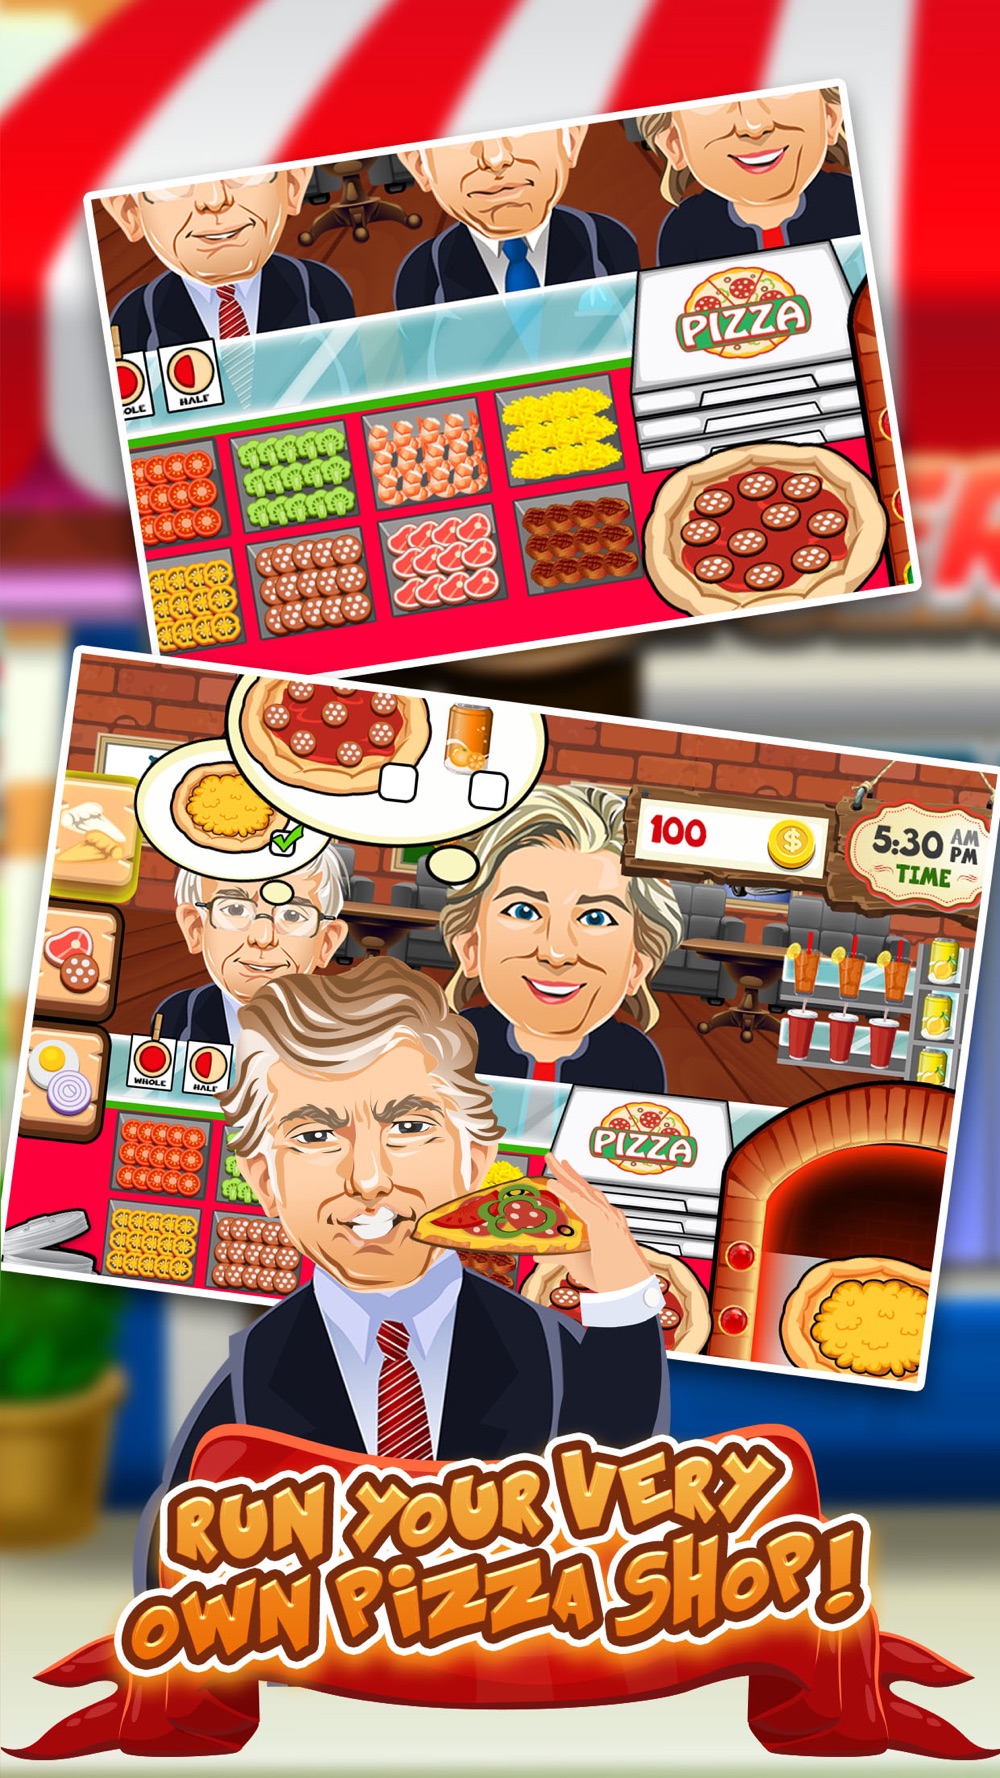 Trump’s Pizza Restaurant Dash – 2016 Election on the Run Wall Cooking Game!